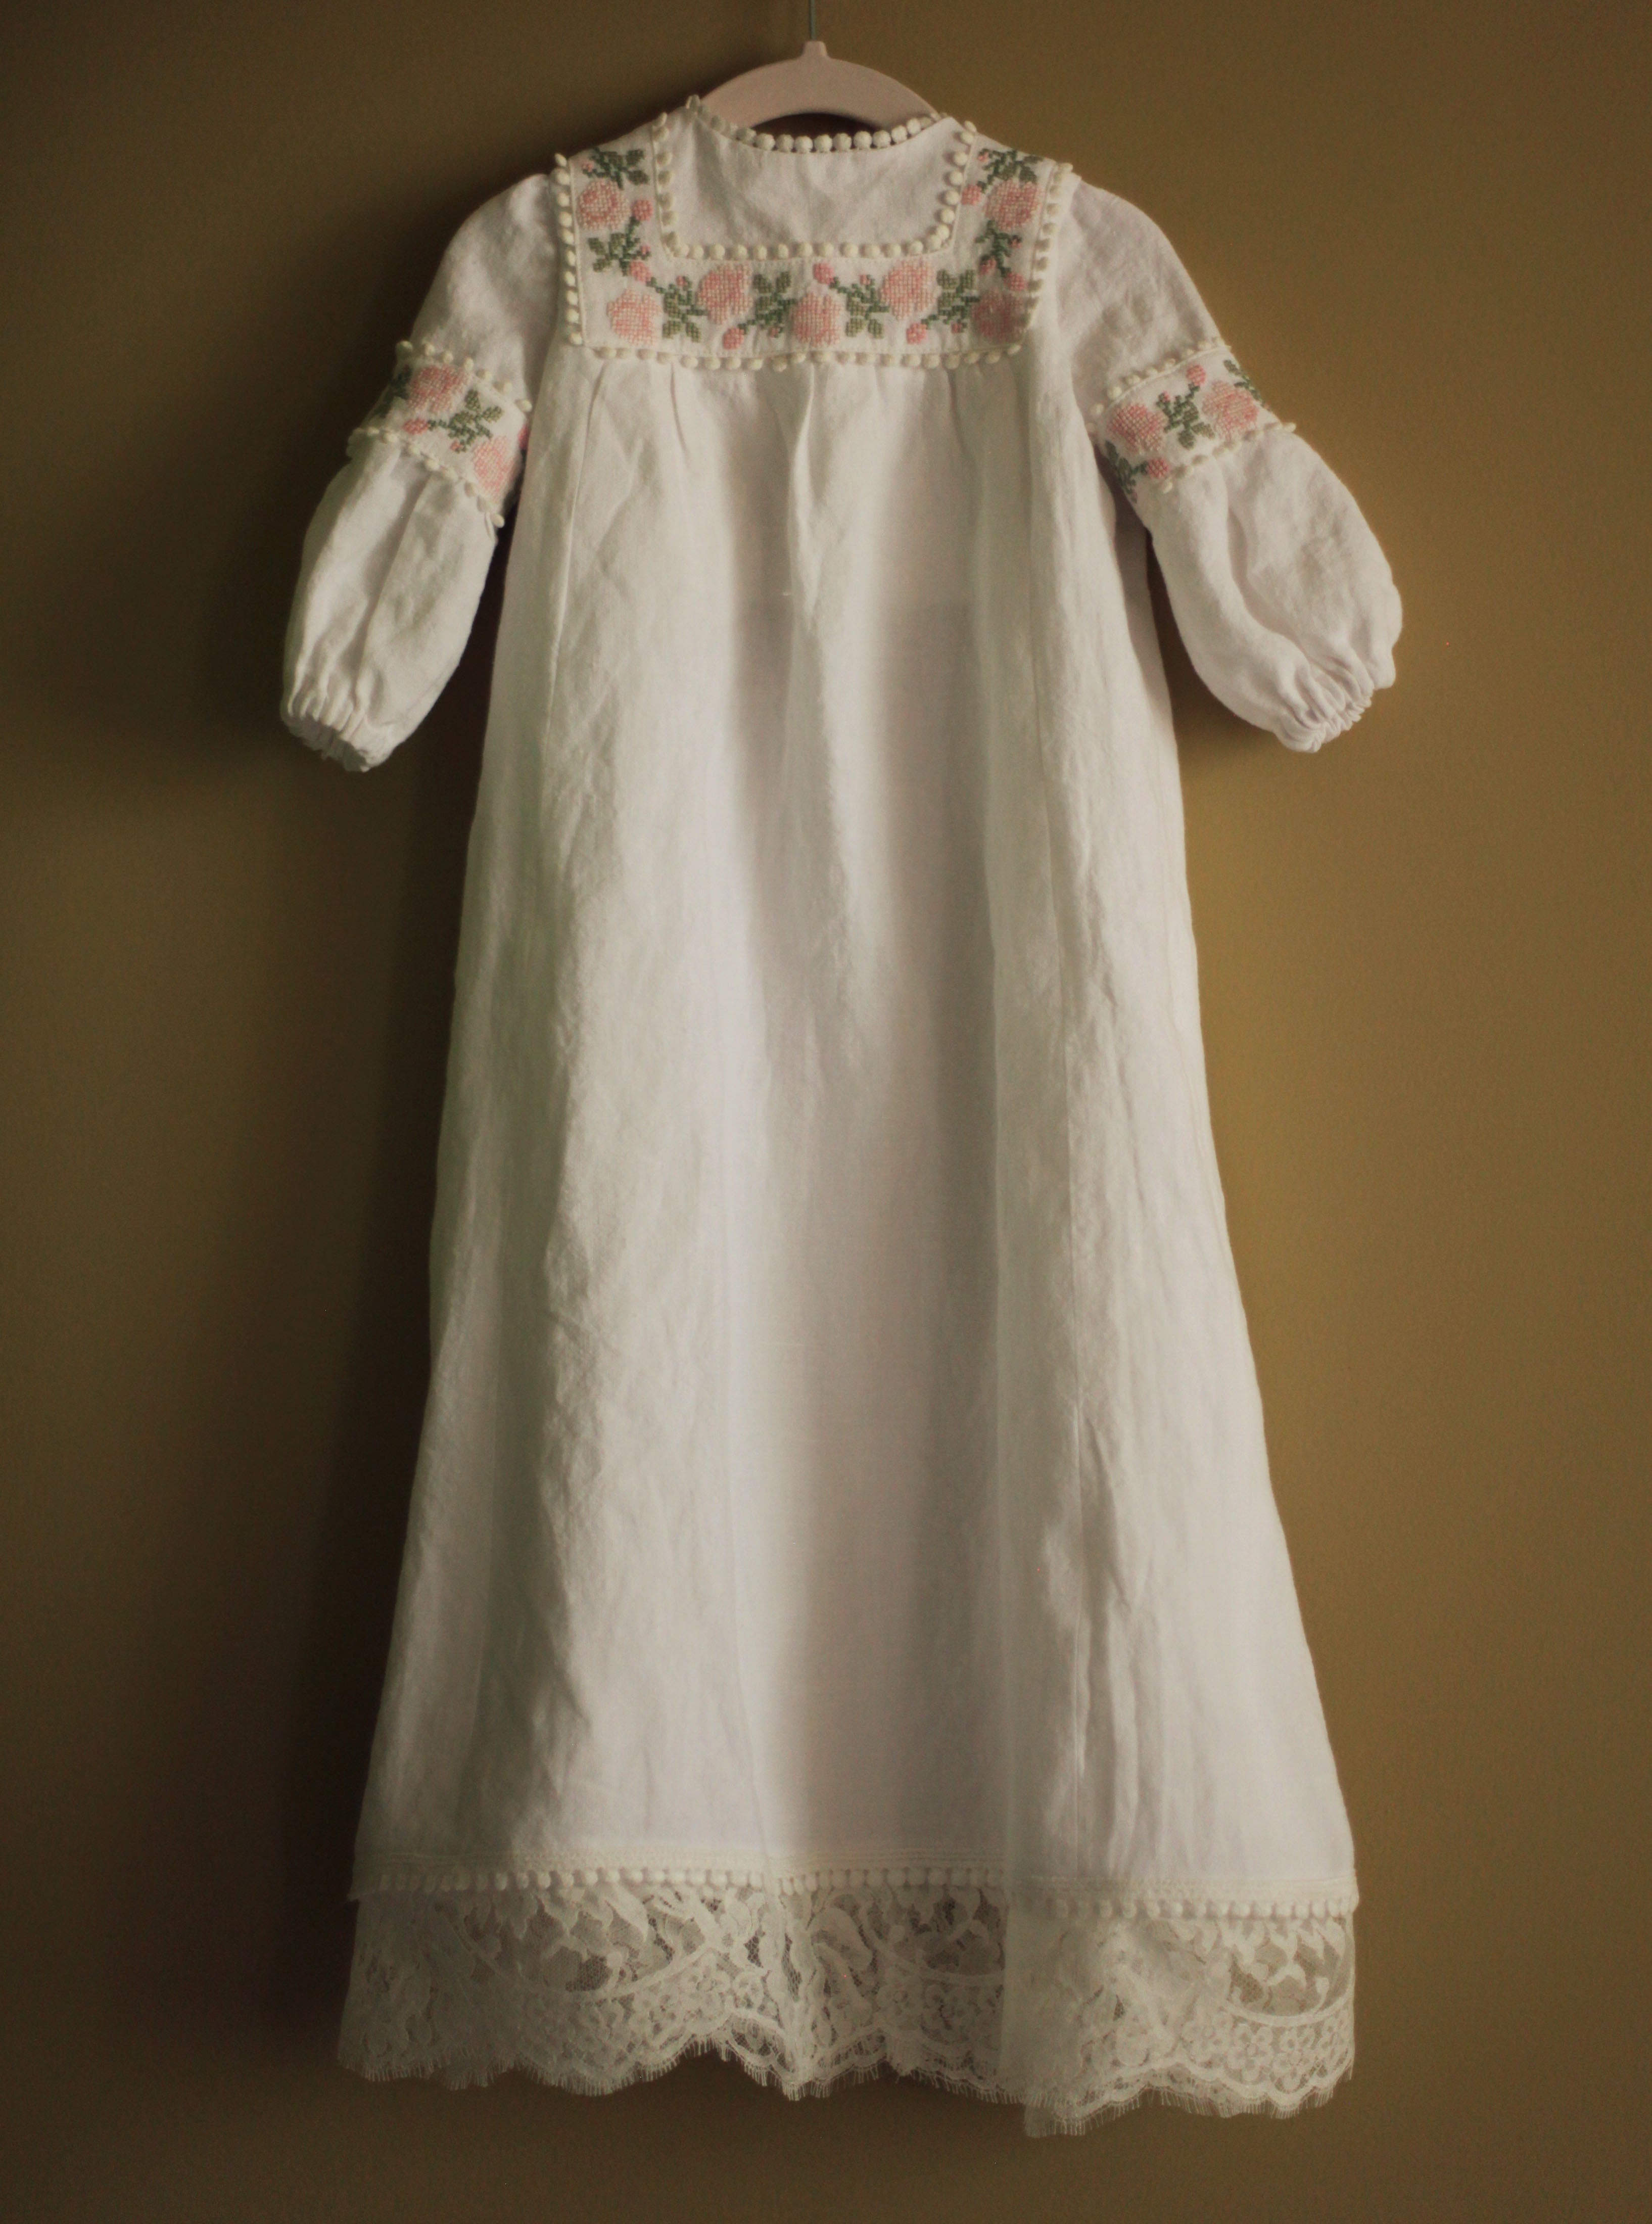 rose embroidered baptismal gown